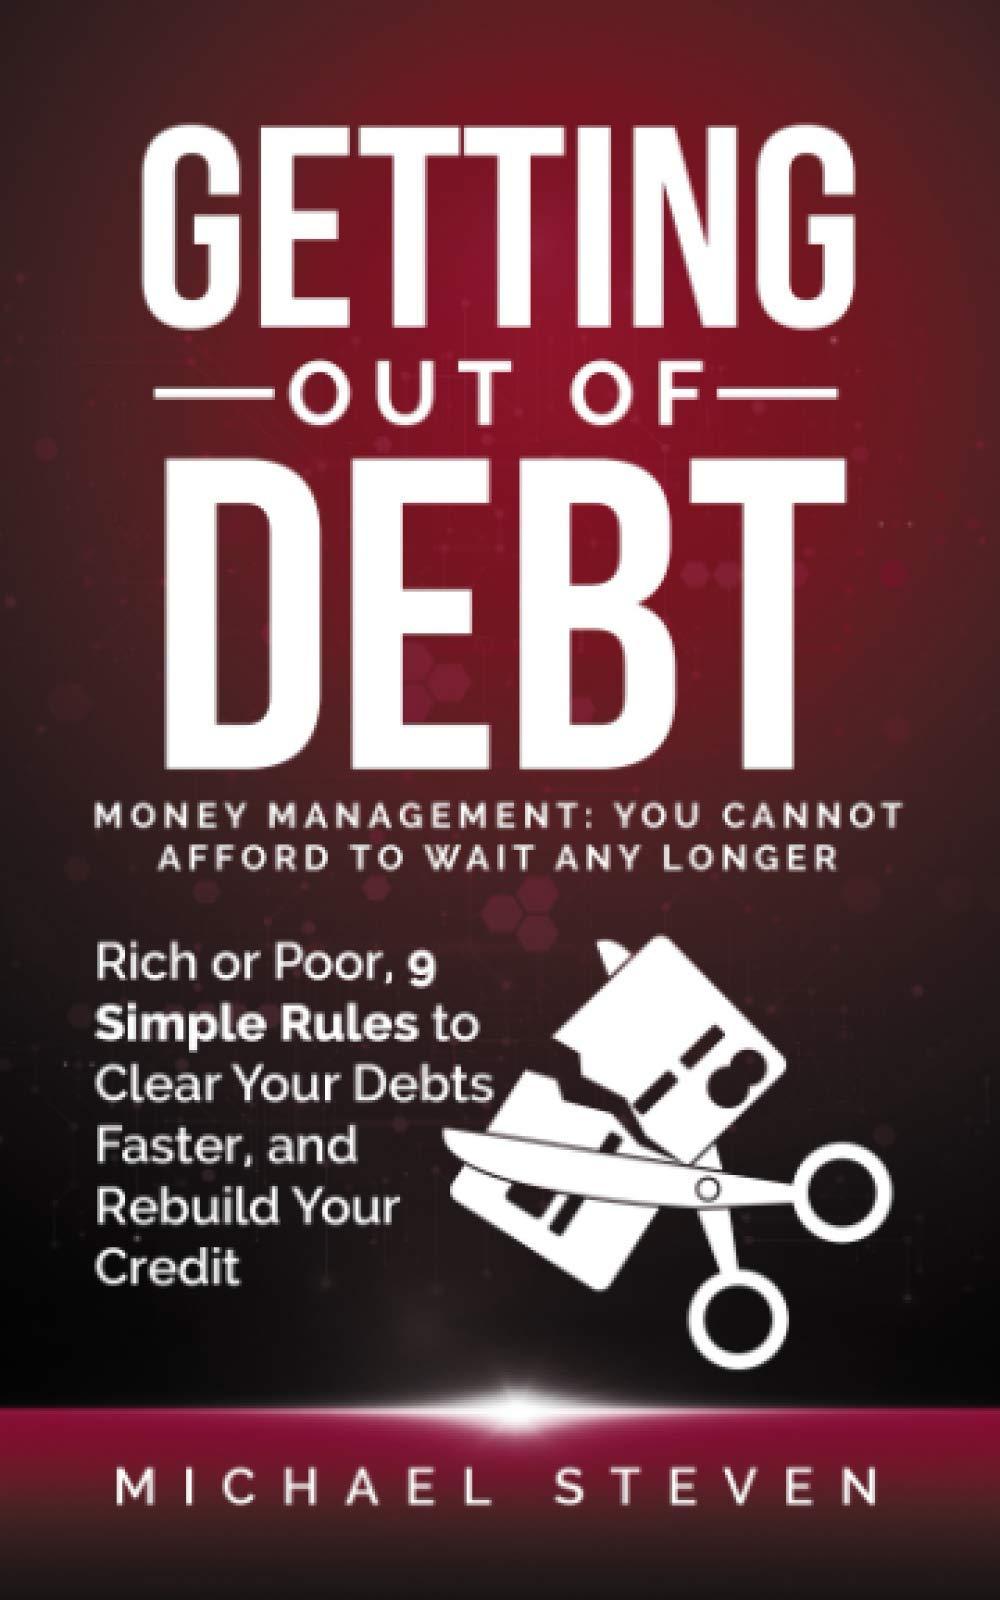 getting out of debt money management you cannot afford to wait any longer rich or poor 9 simple rules to